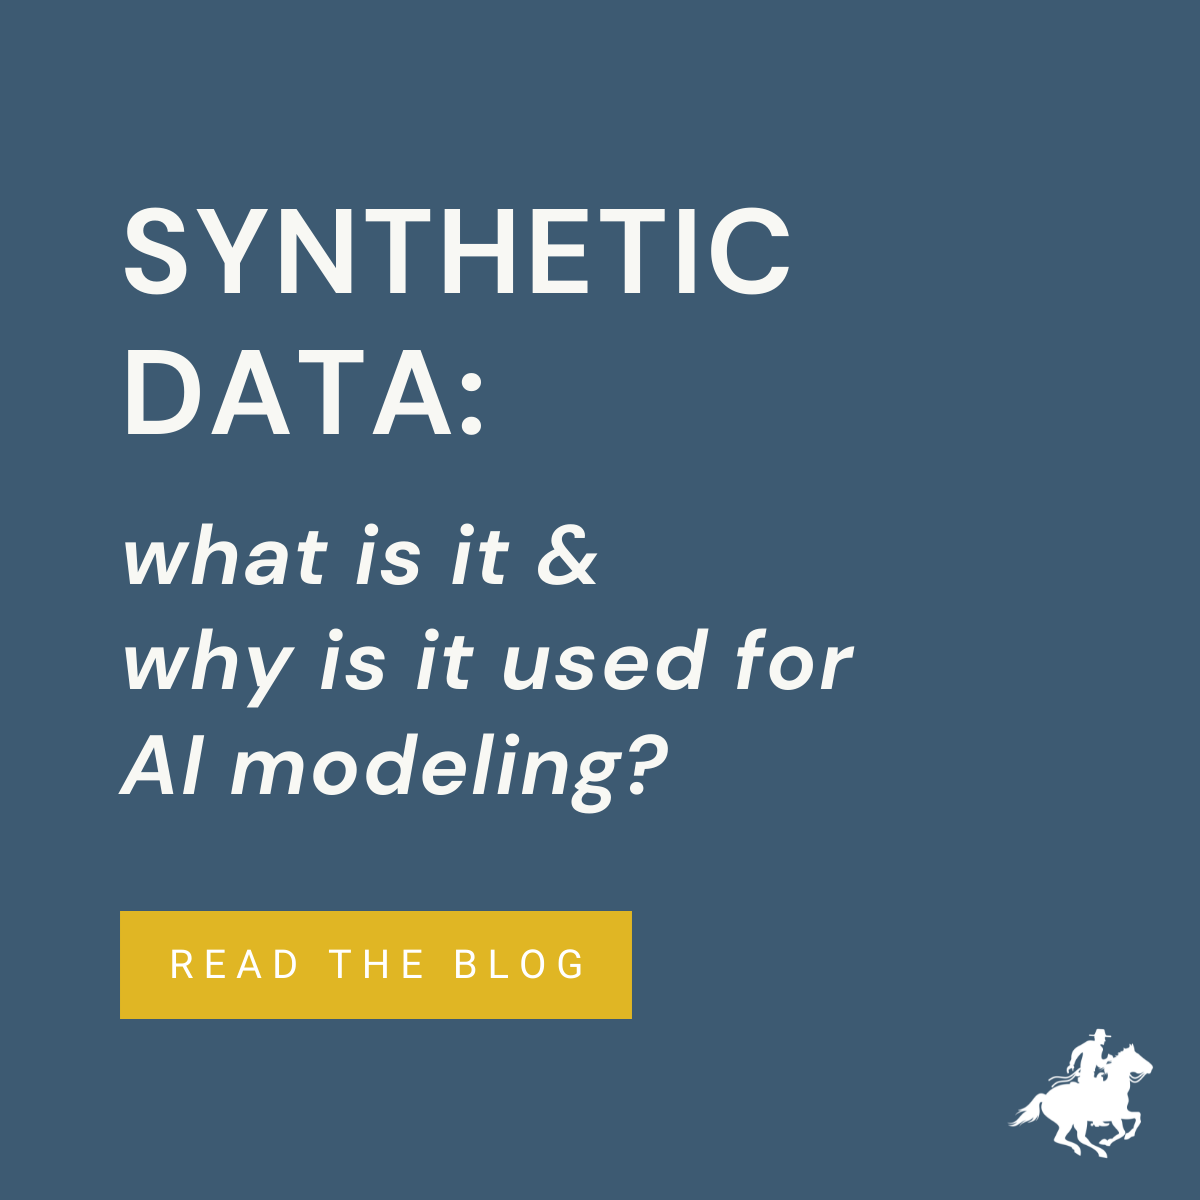 Synthetic Data: what is it & why is it used for AI modeling?